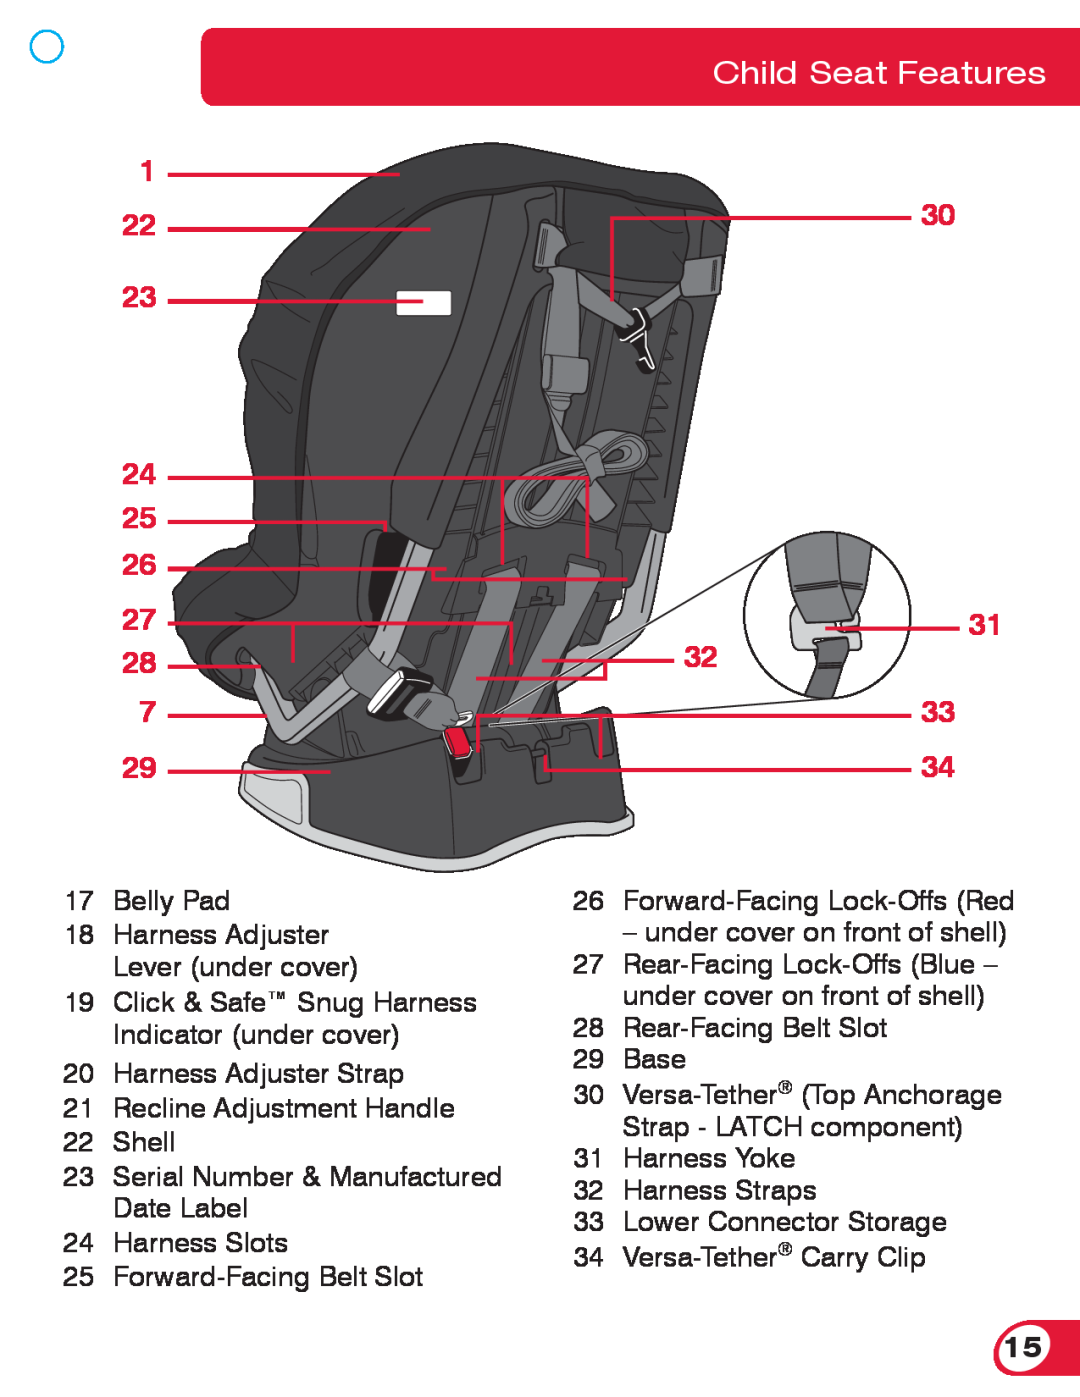 Britax 70 CS manual Child Seat Features, Belly Pad 18 Harness Adjuster Lever under cover 